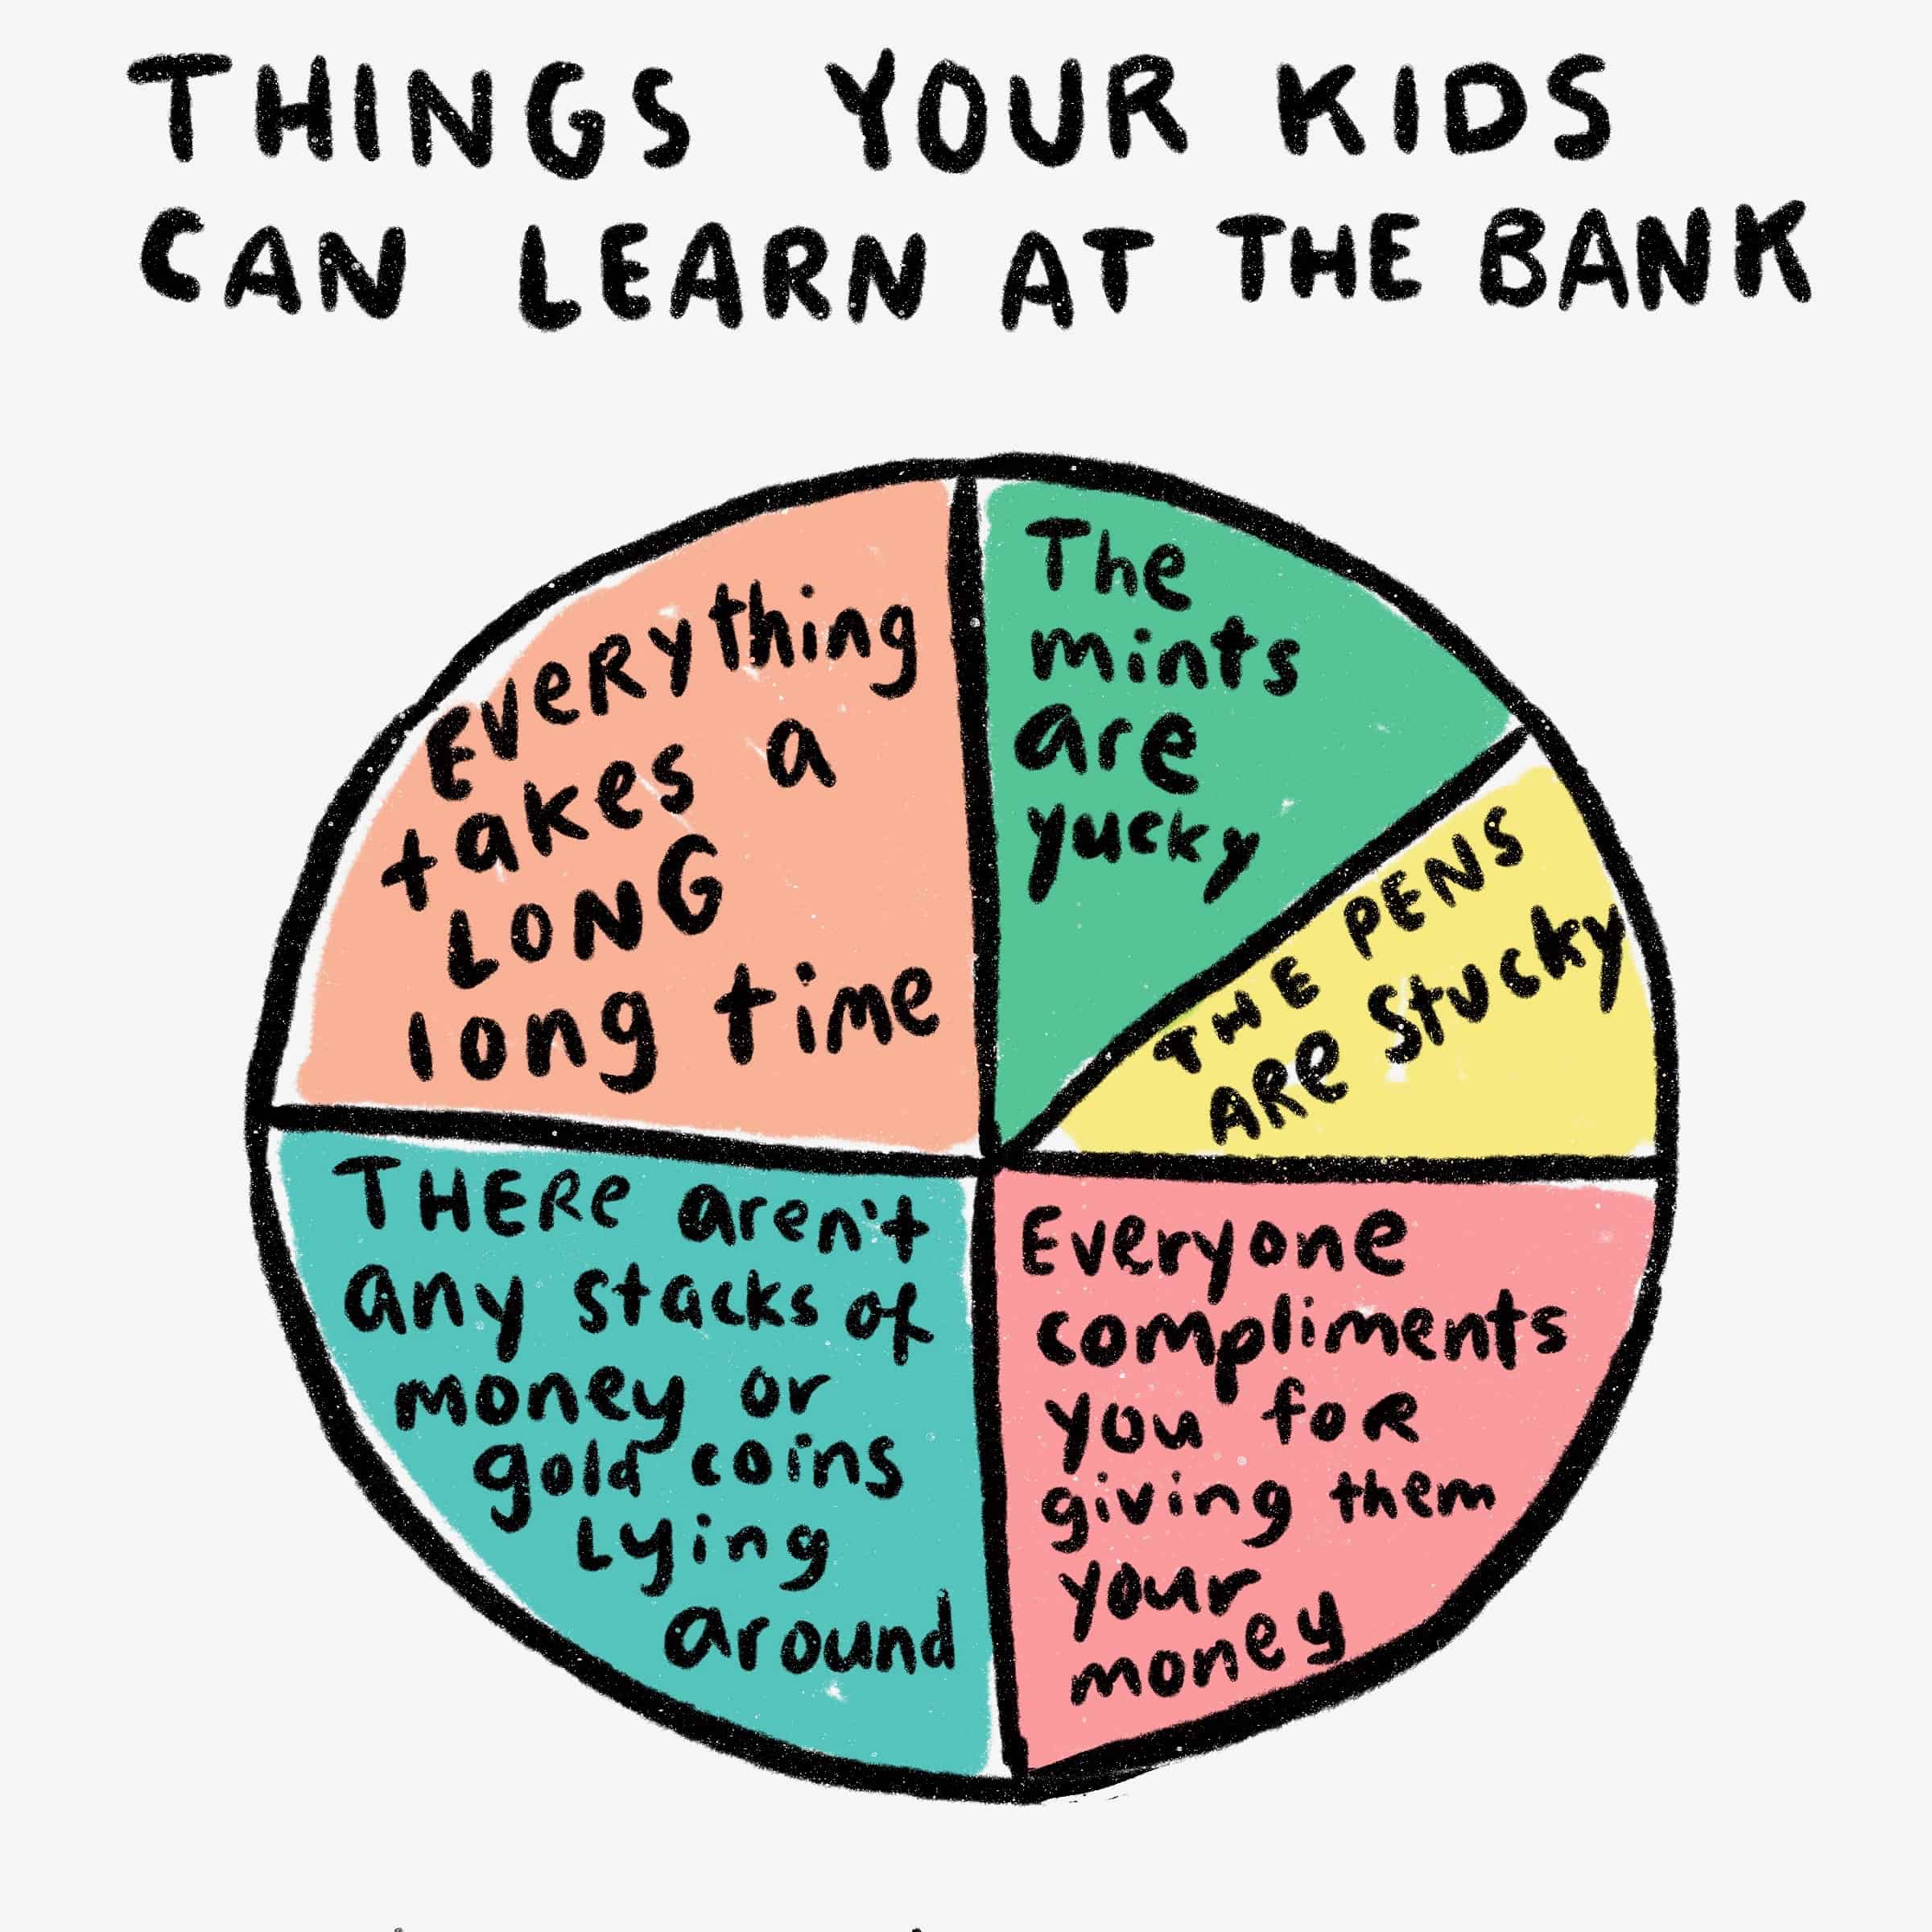 Financial literacy includes taking your kid to the bank